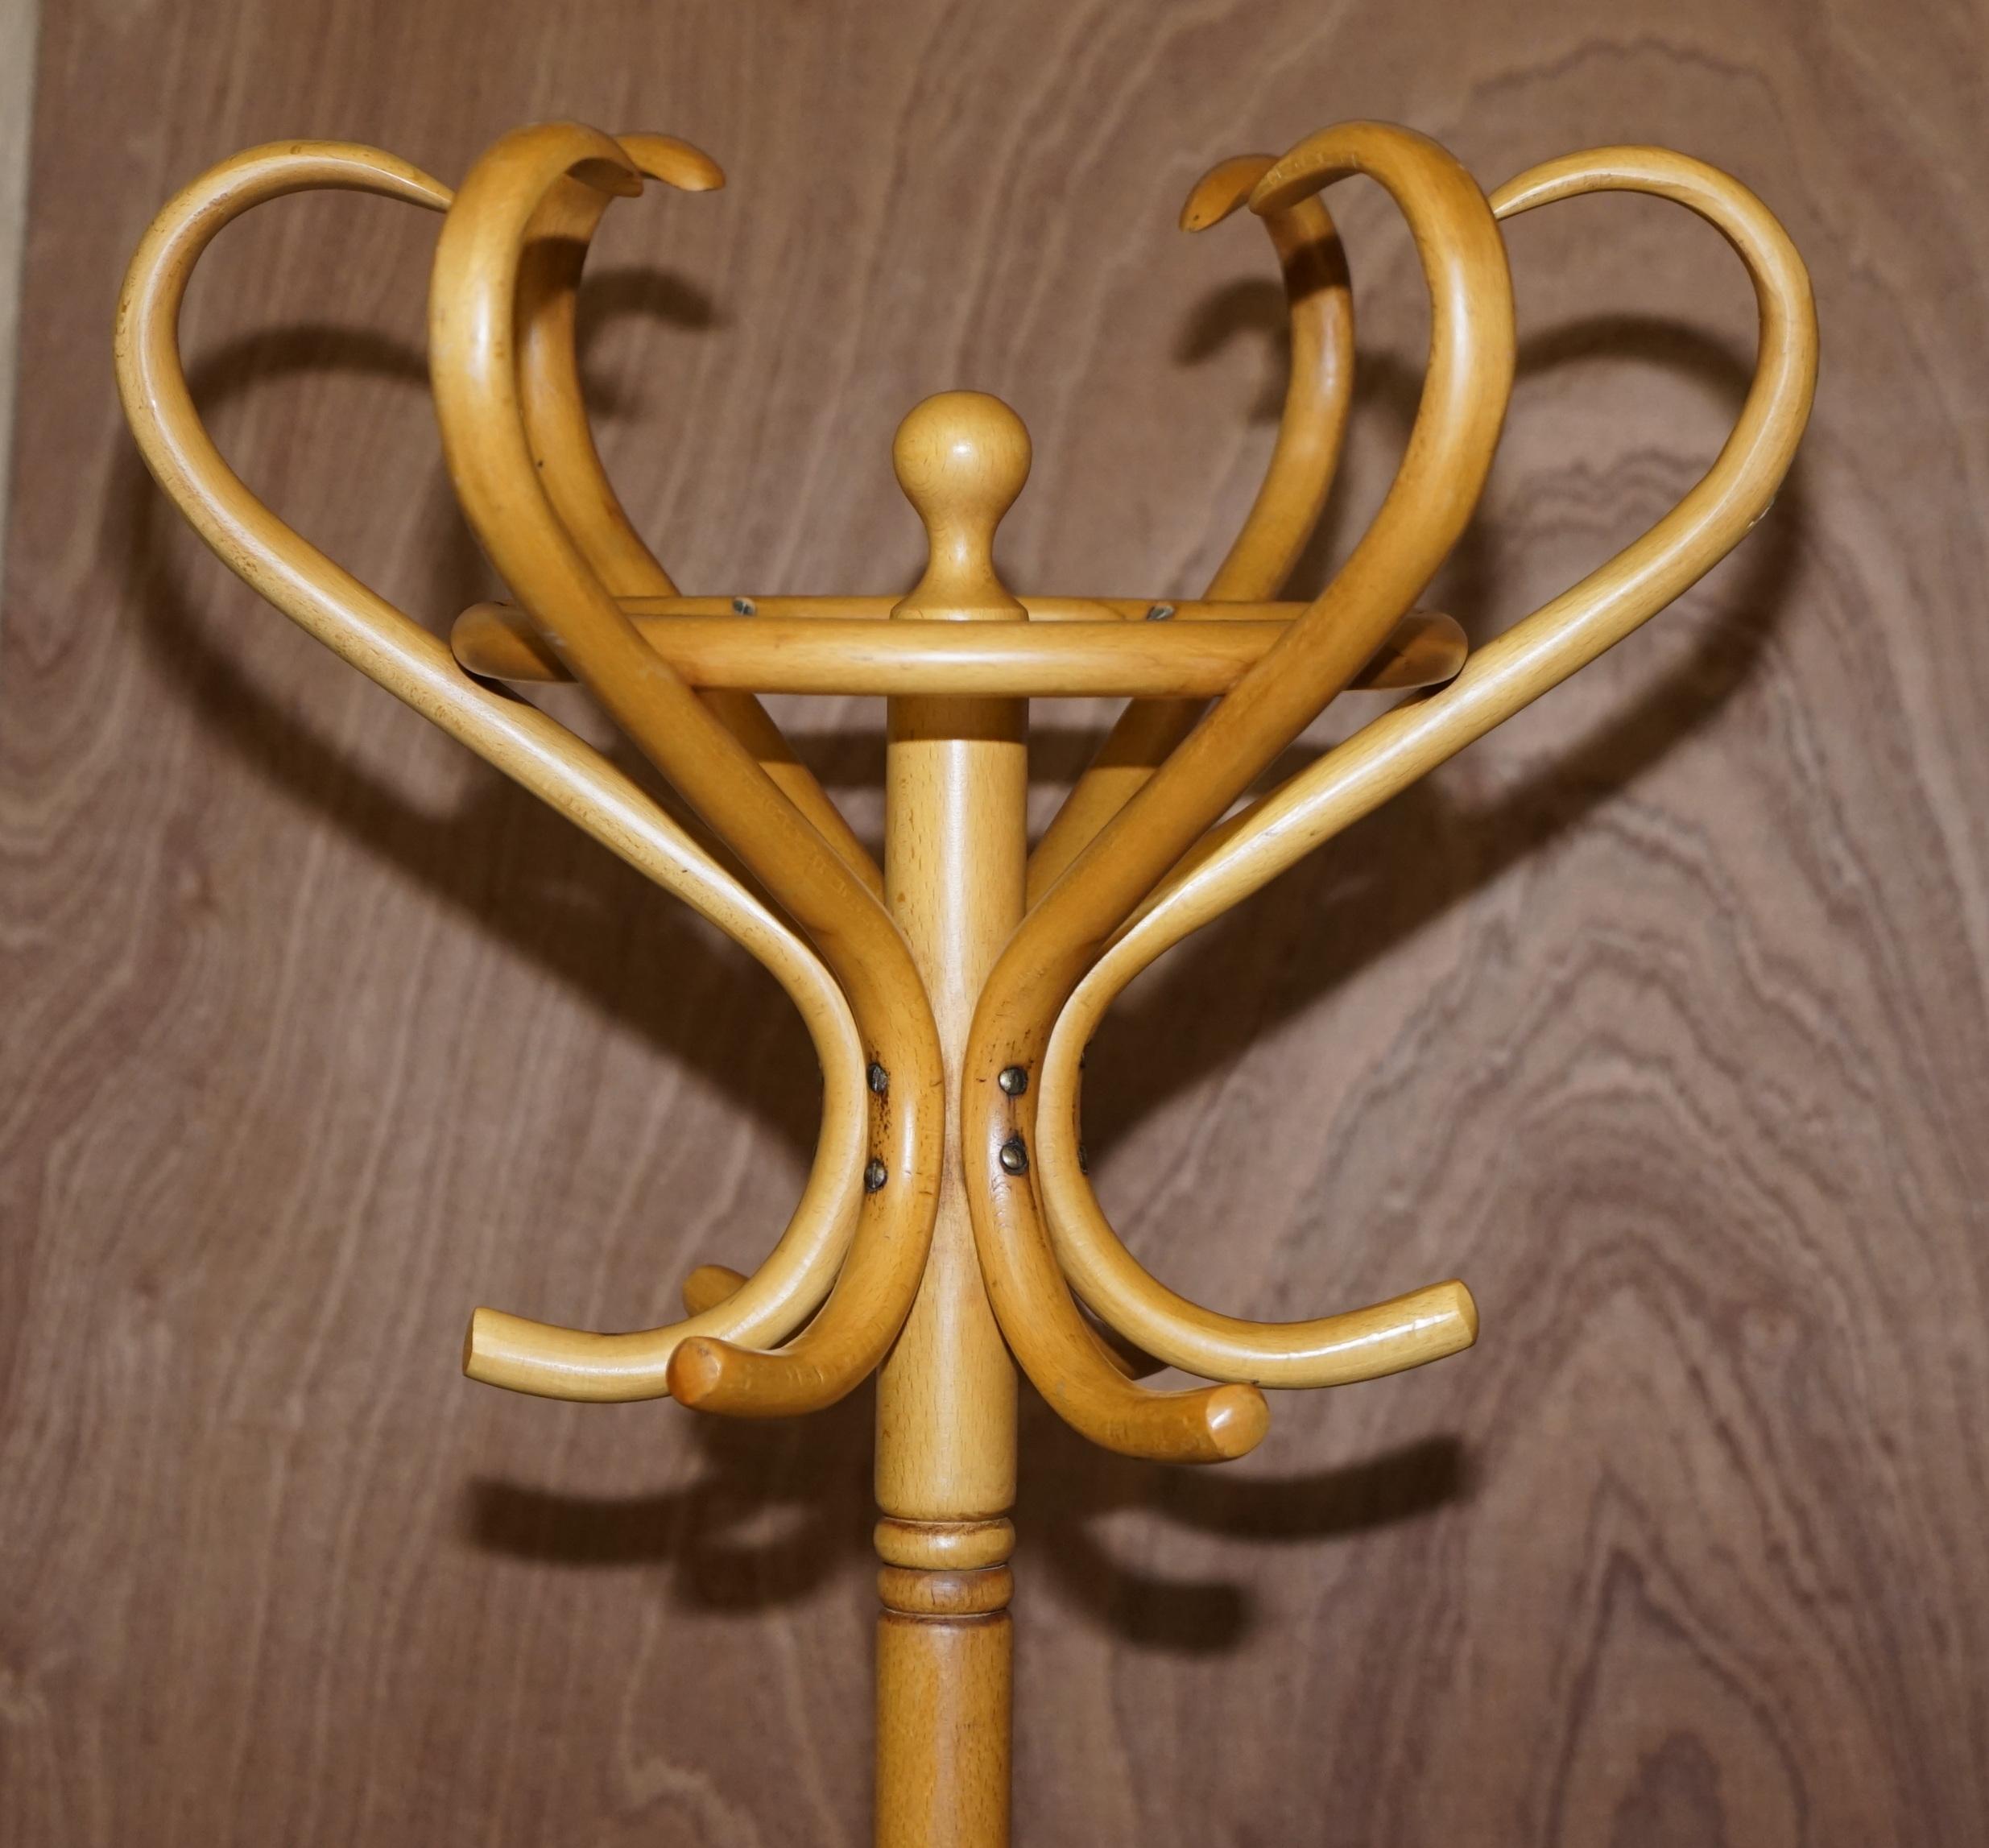 We are delighted to offer this lovely tall beech bentwood Thonet hat scarf and coat stand 

A very good looking and well-made piece, it looks to be in perfect order, this is a nice tall coat stand so easy to see what’s